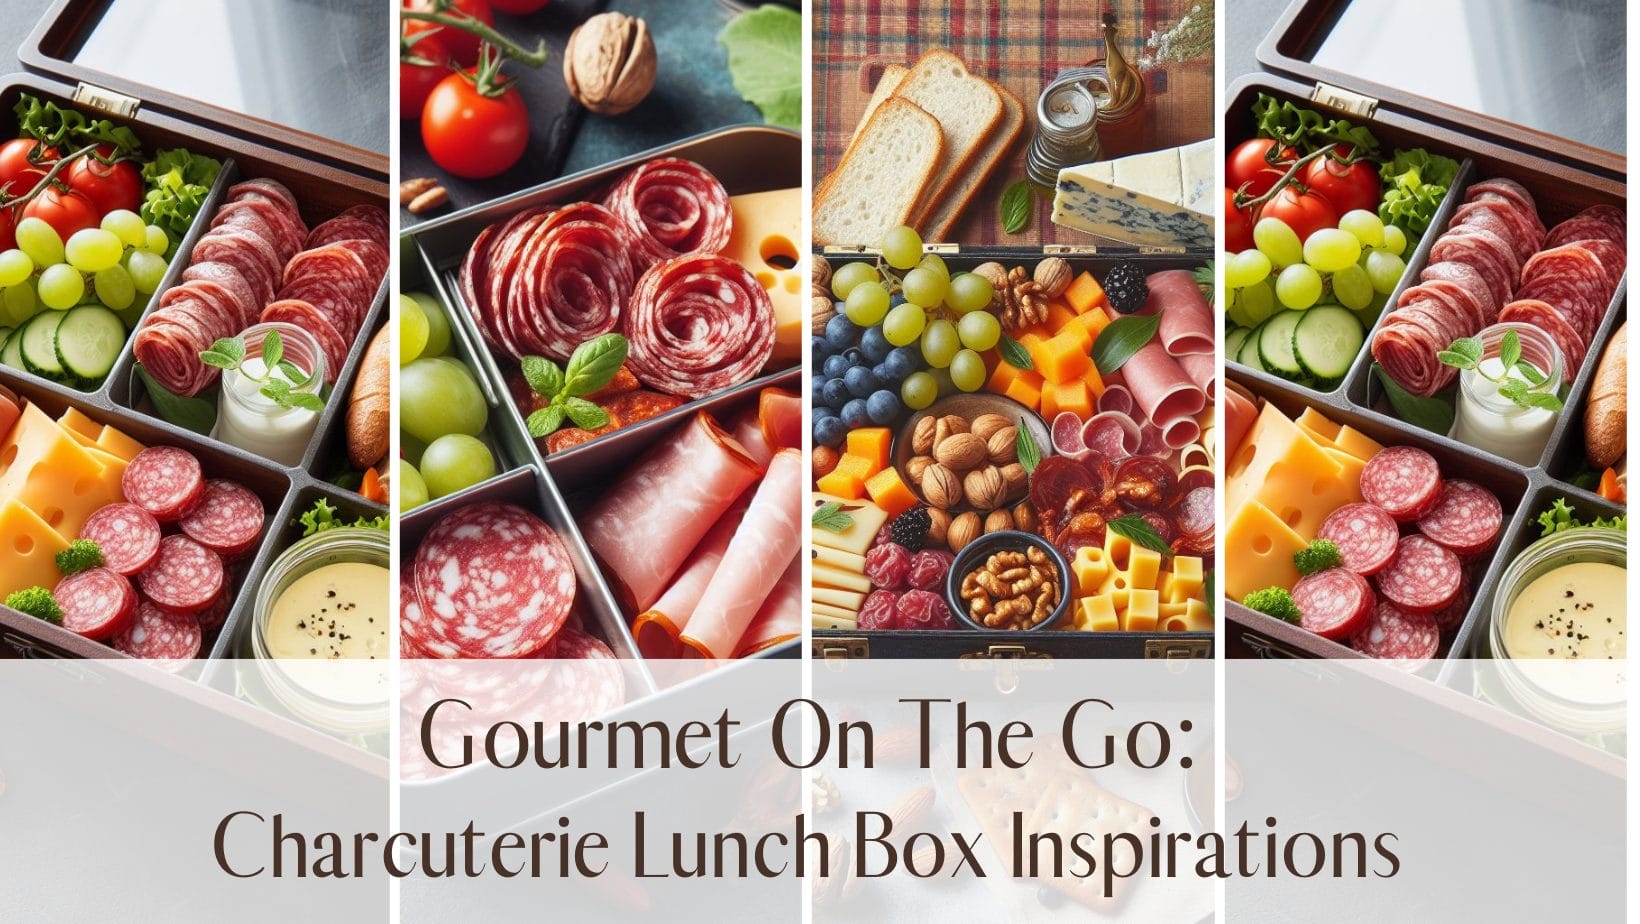 Gourmet On The Go: Charcuterie Lunch Box Inspirations 